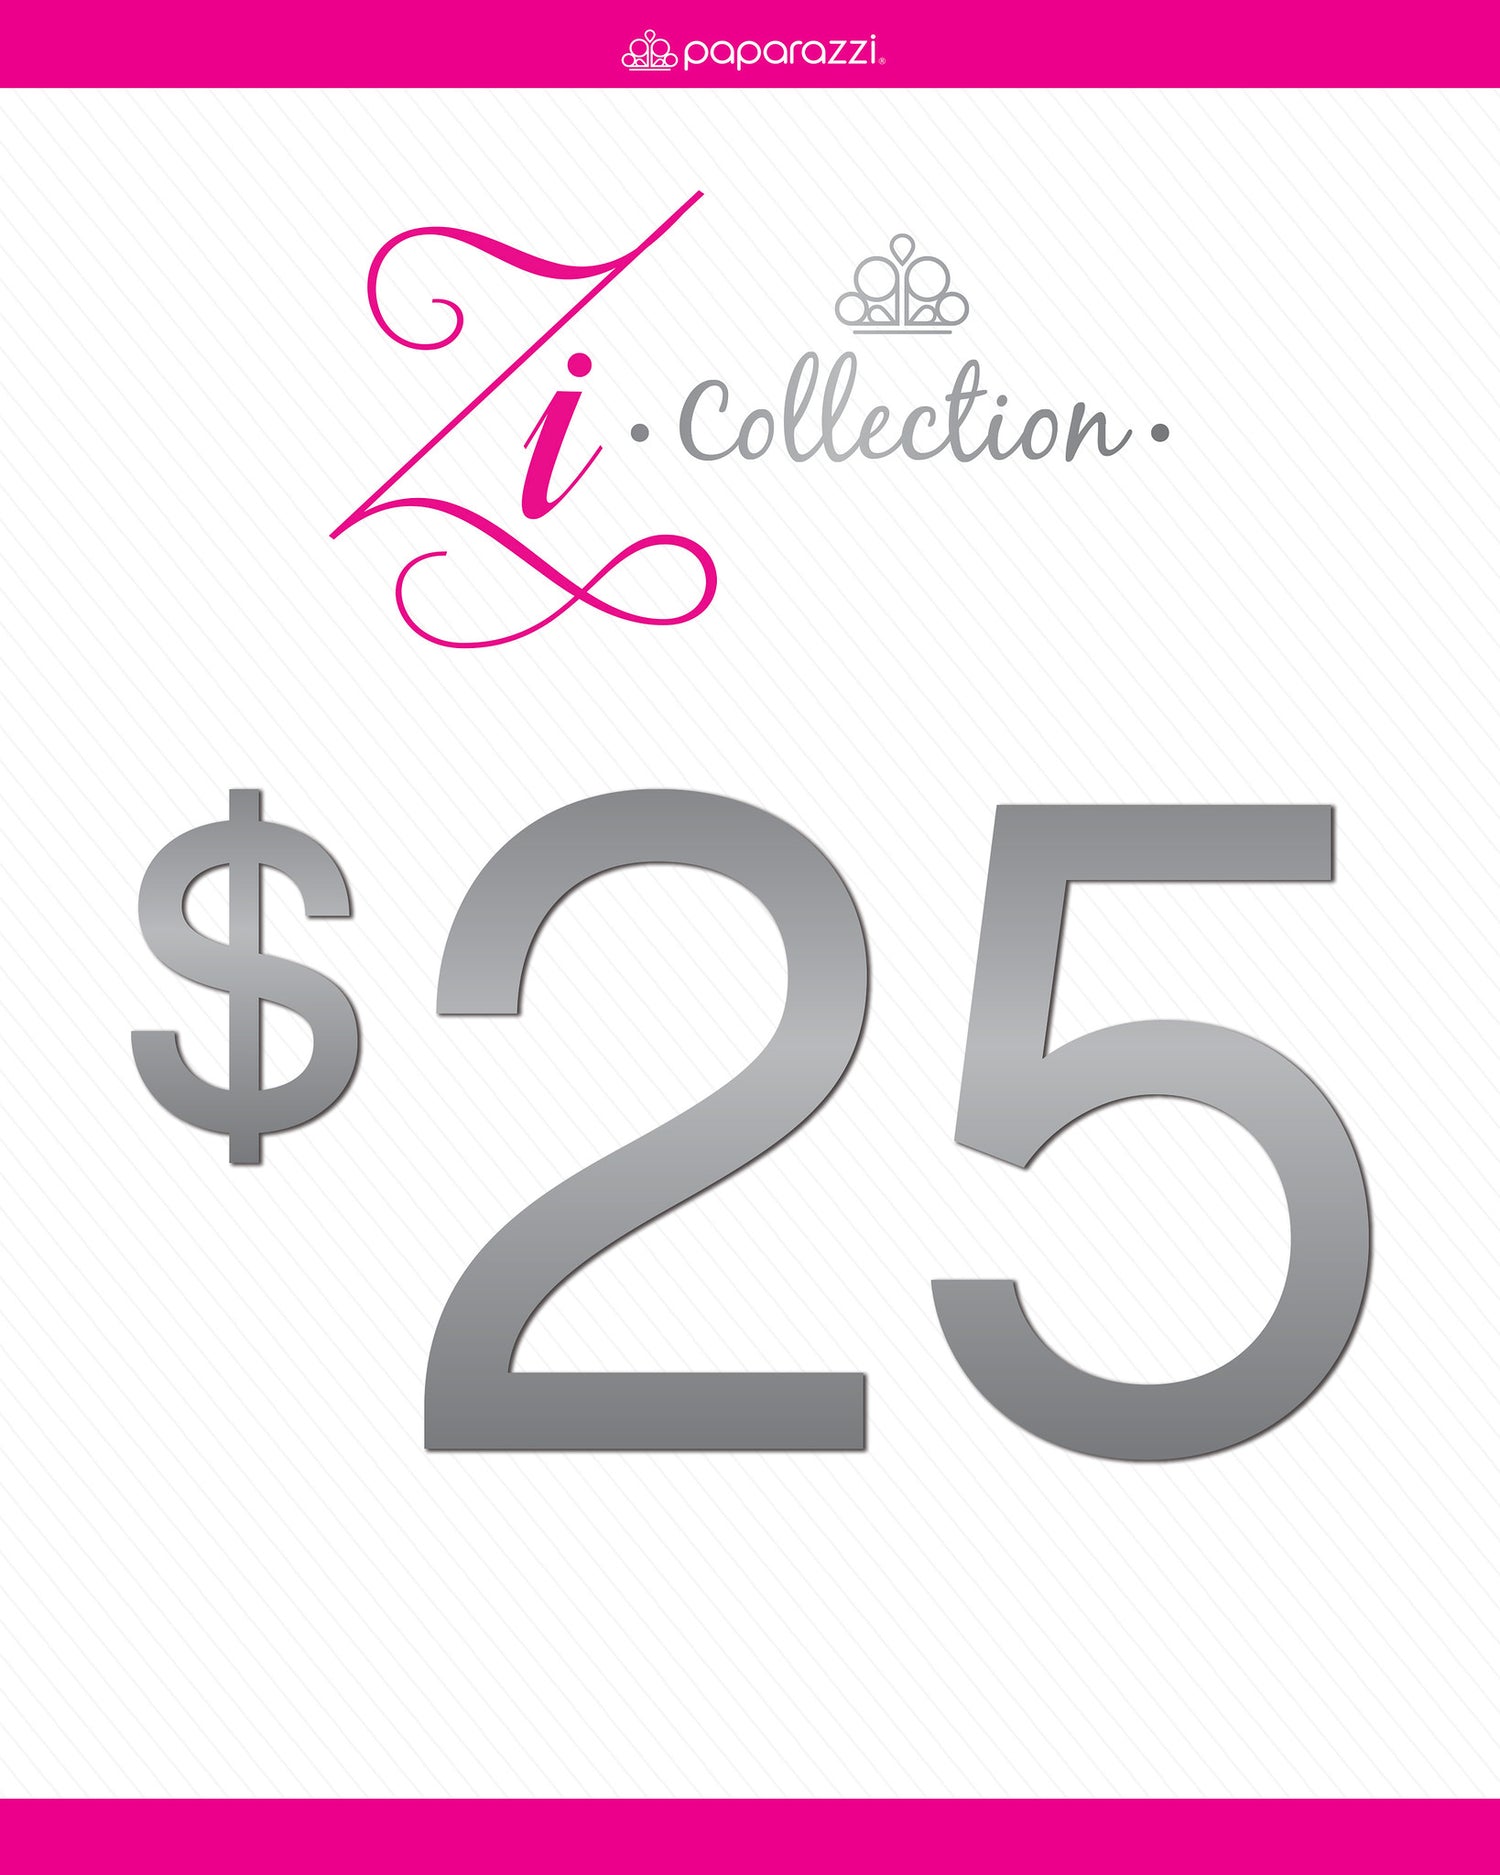 $25 Paparazzi Accessories Zi Collection